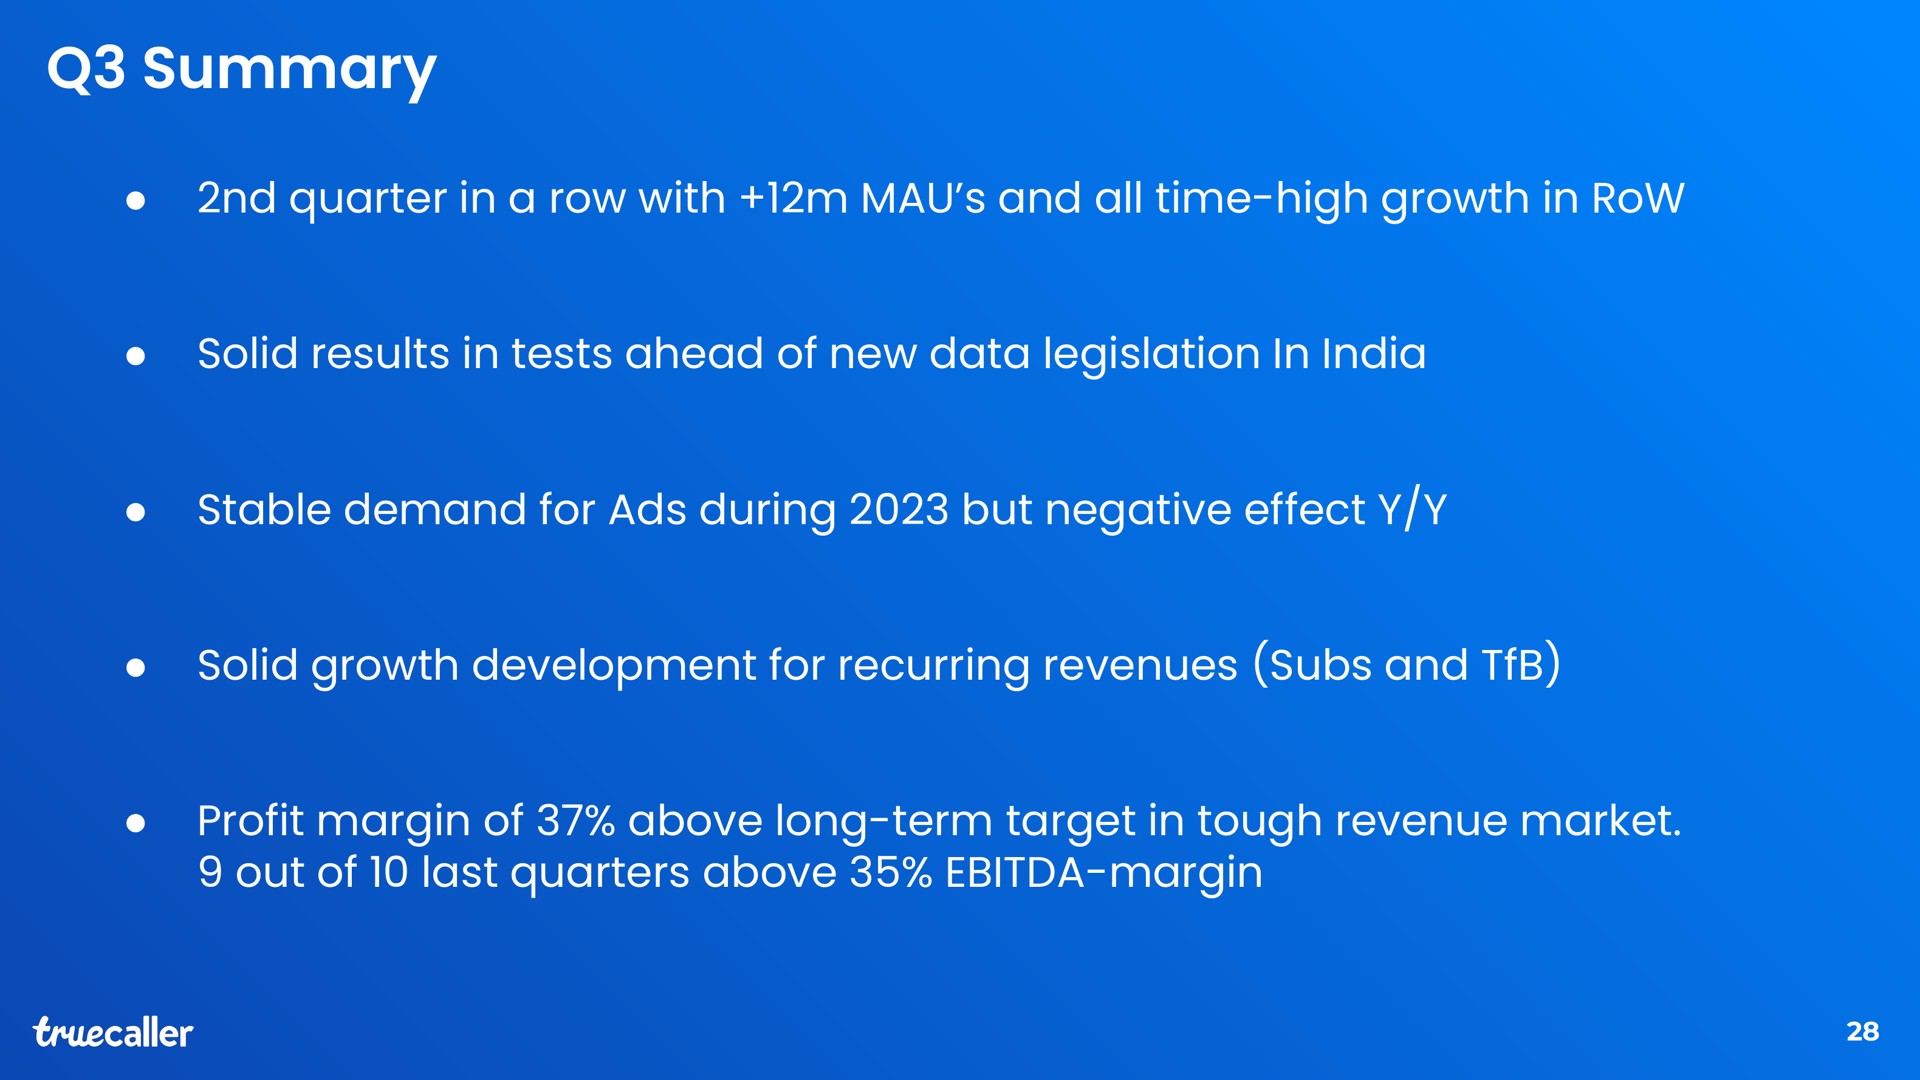 summary quarter in a row with mau and all time high growth in row solid results in tests ahead of new data legislation in stable demand for ads during but negative effect solid growth development for recurring revenues subs and profit margin of above long term target in tough revenue market out of last quarters above margin | Truecaller